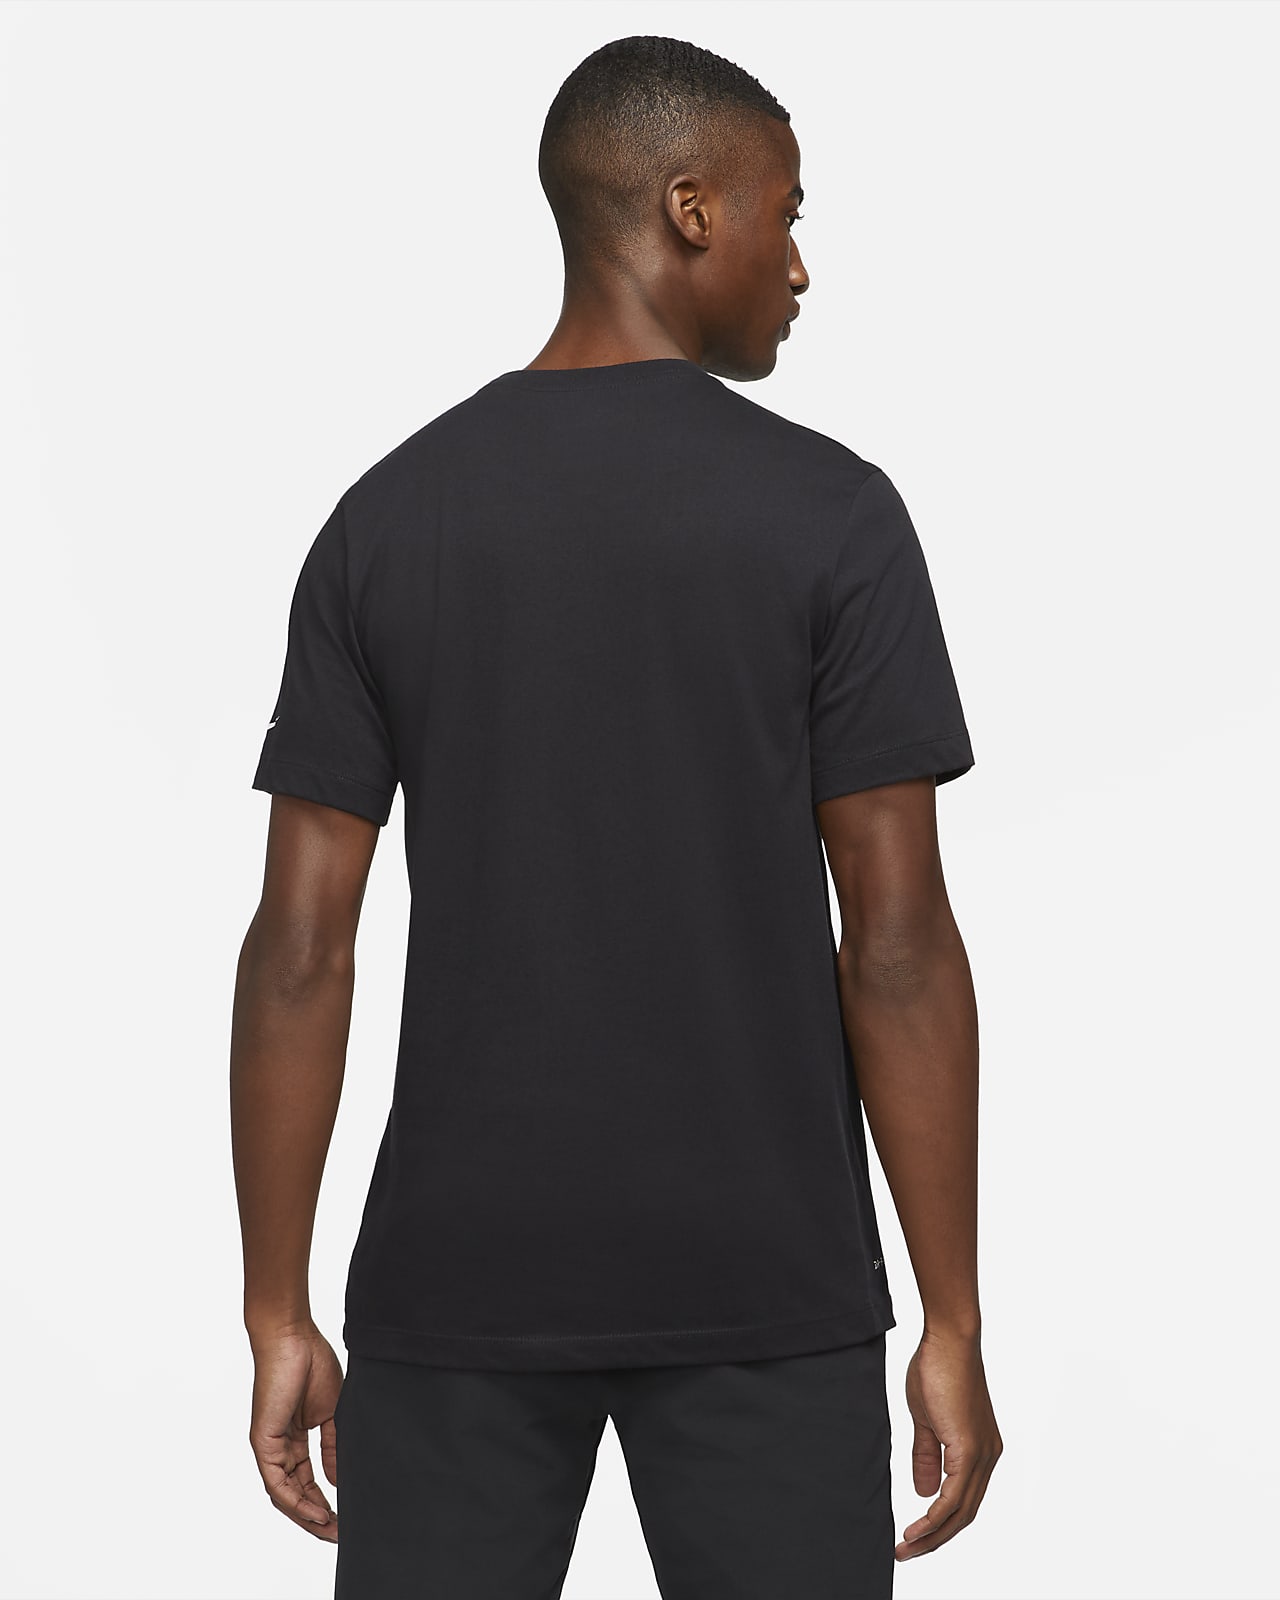 Buy > nike t shirt tiger woods > in stock